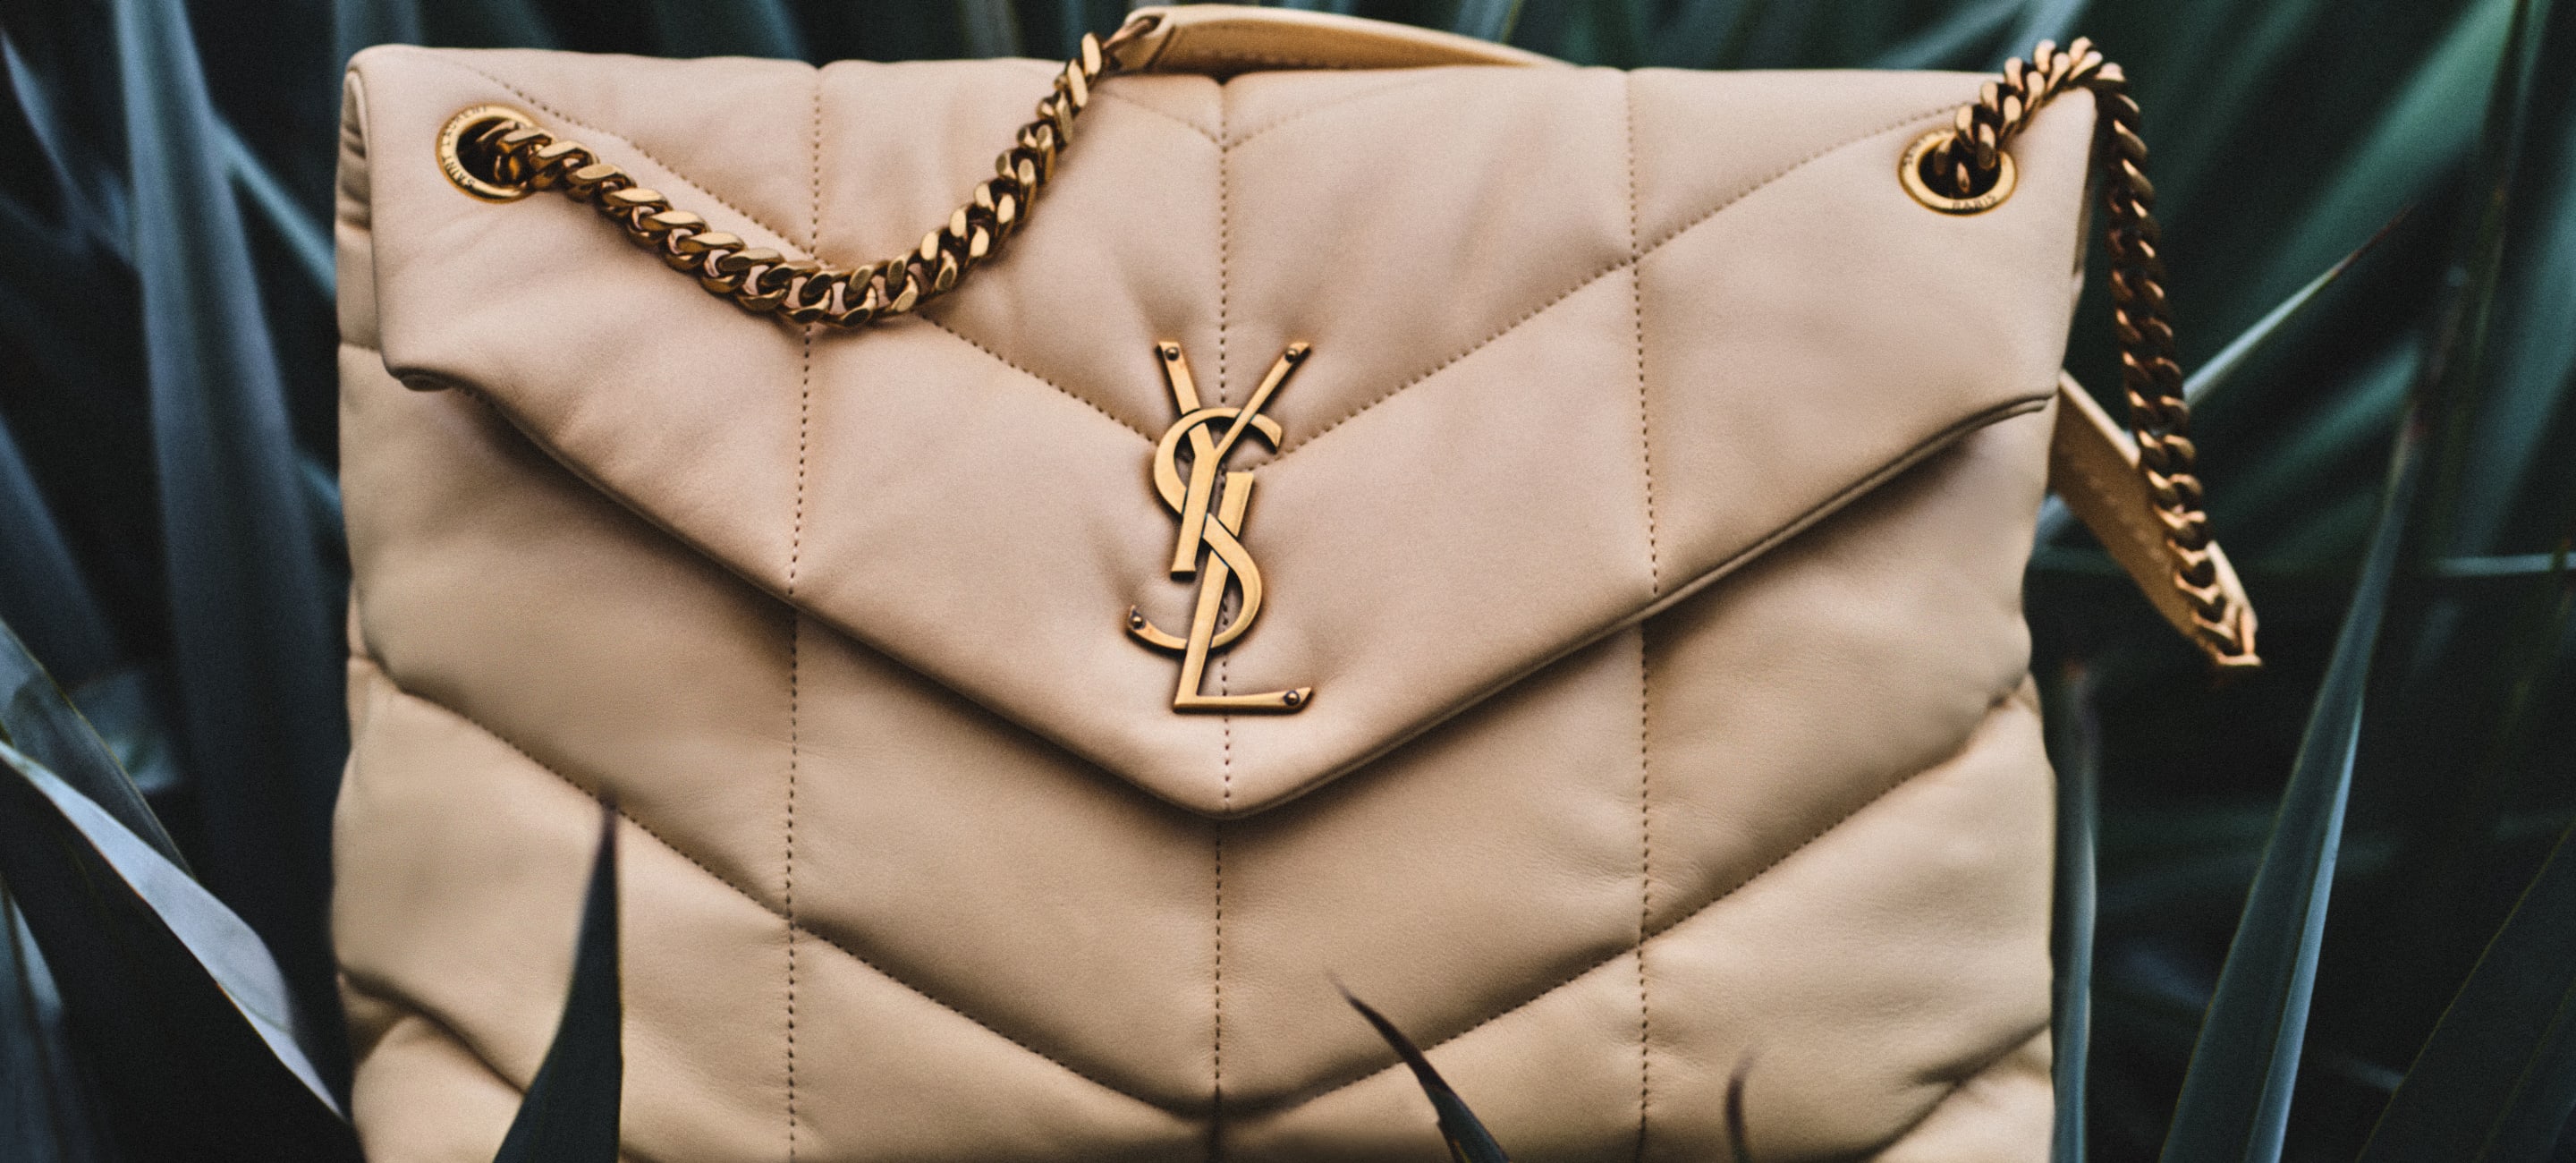 ysl loulou medium outfit